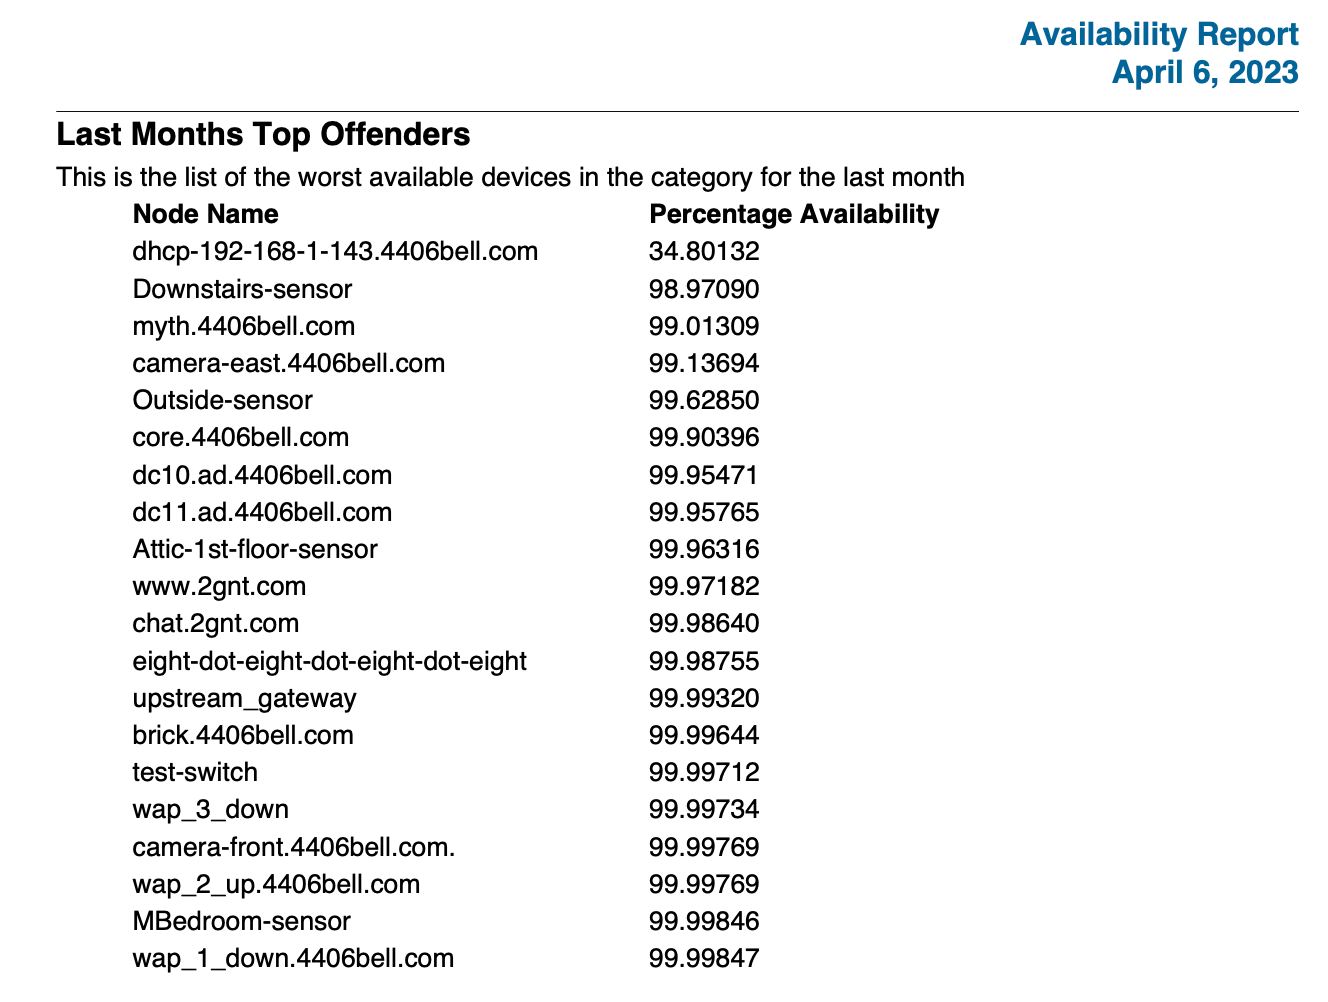 Example of the fourth page of a default classic report. A table of availability statistics for the previous month’s least available devices is displayed.